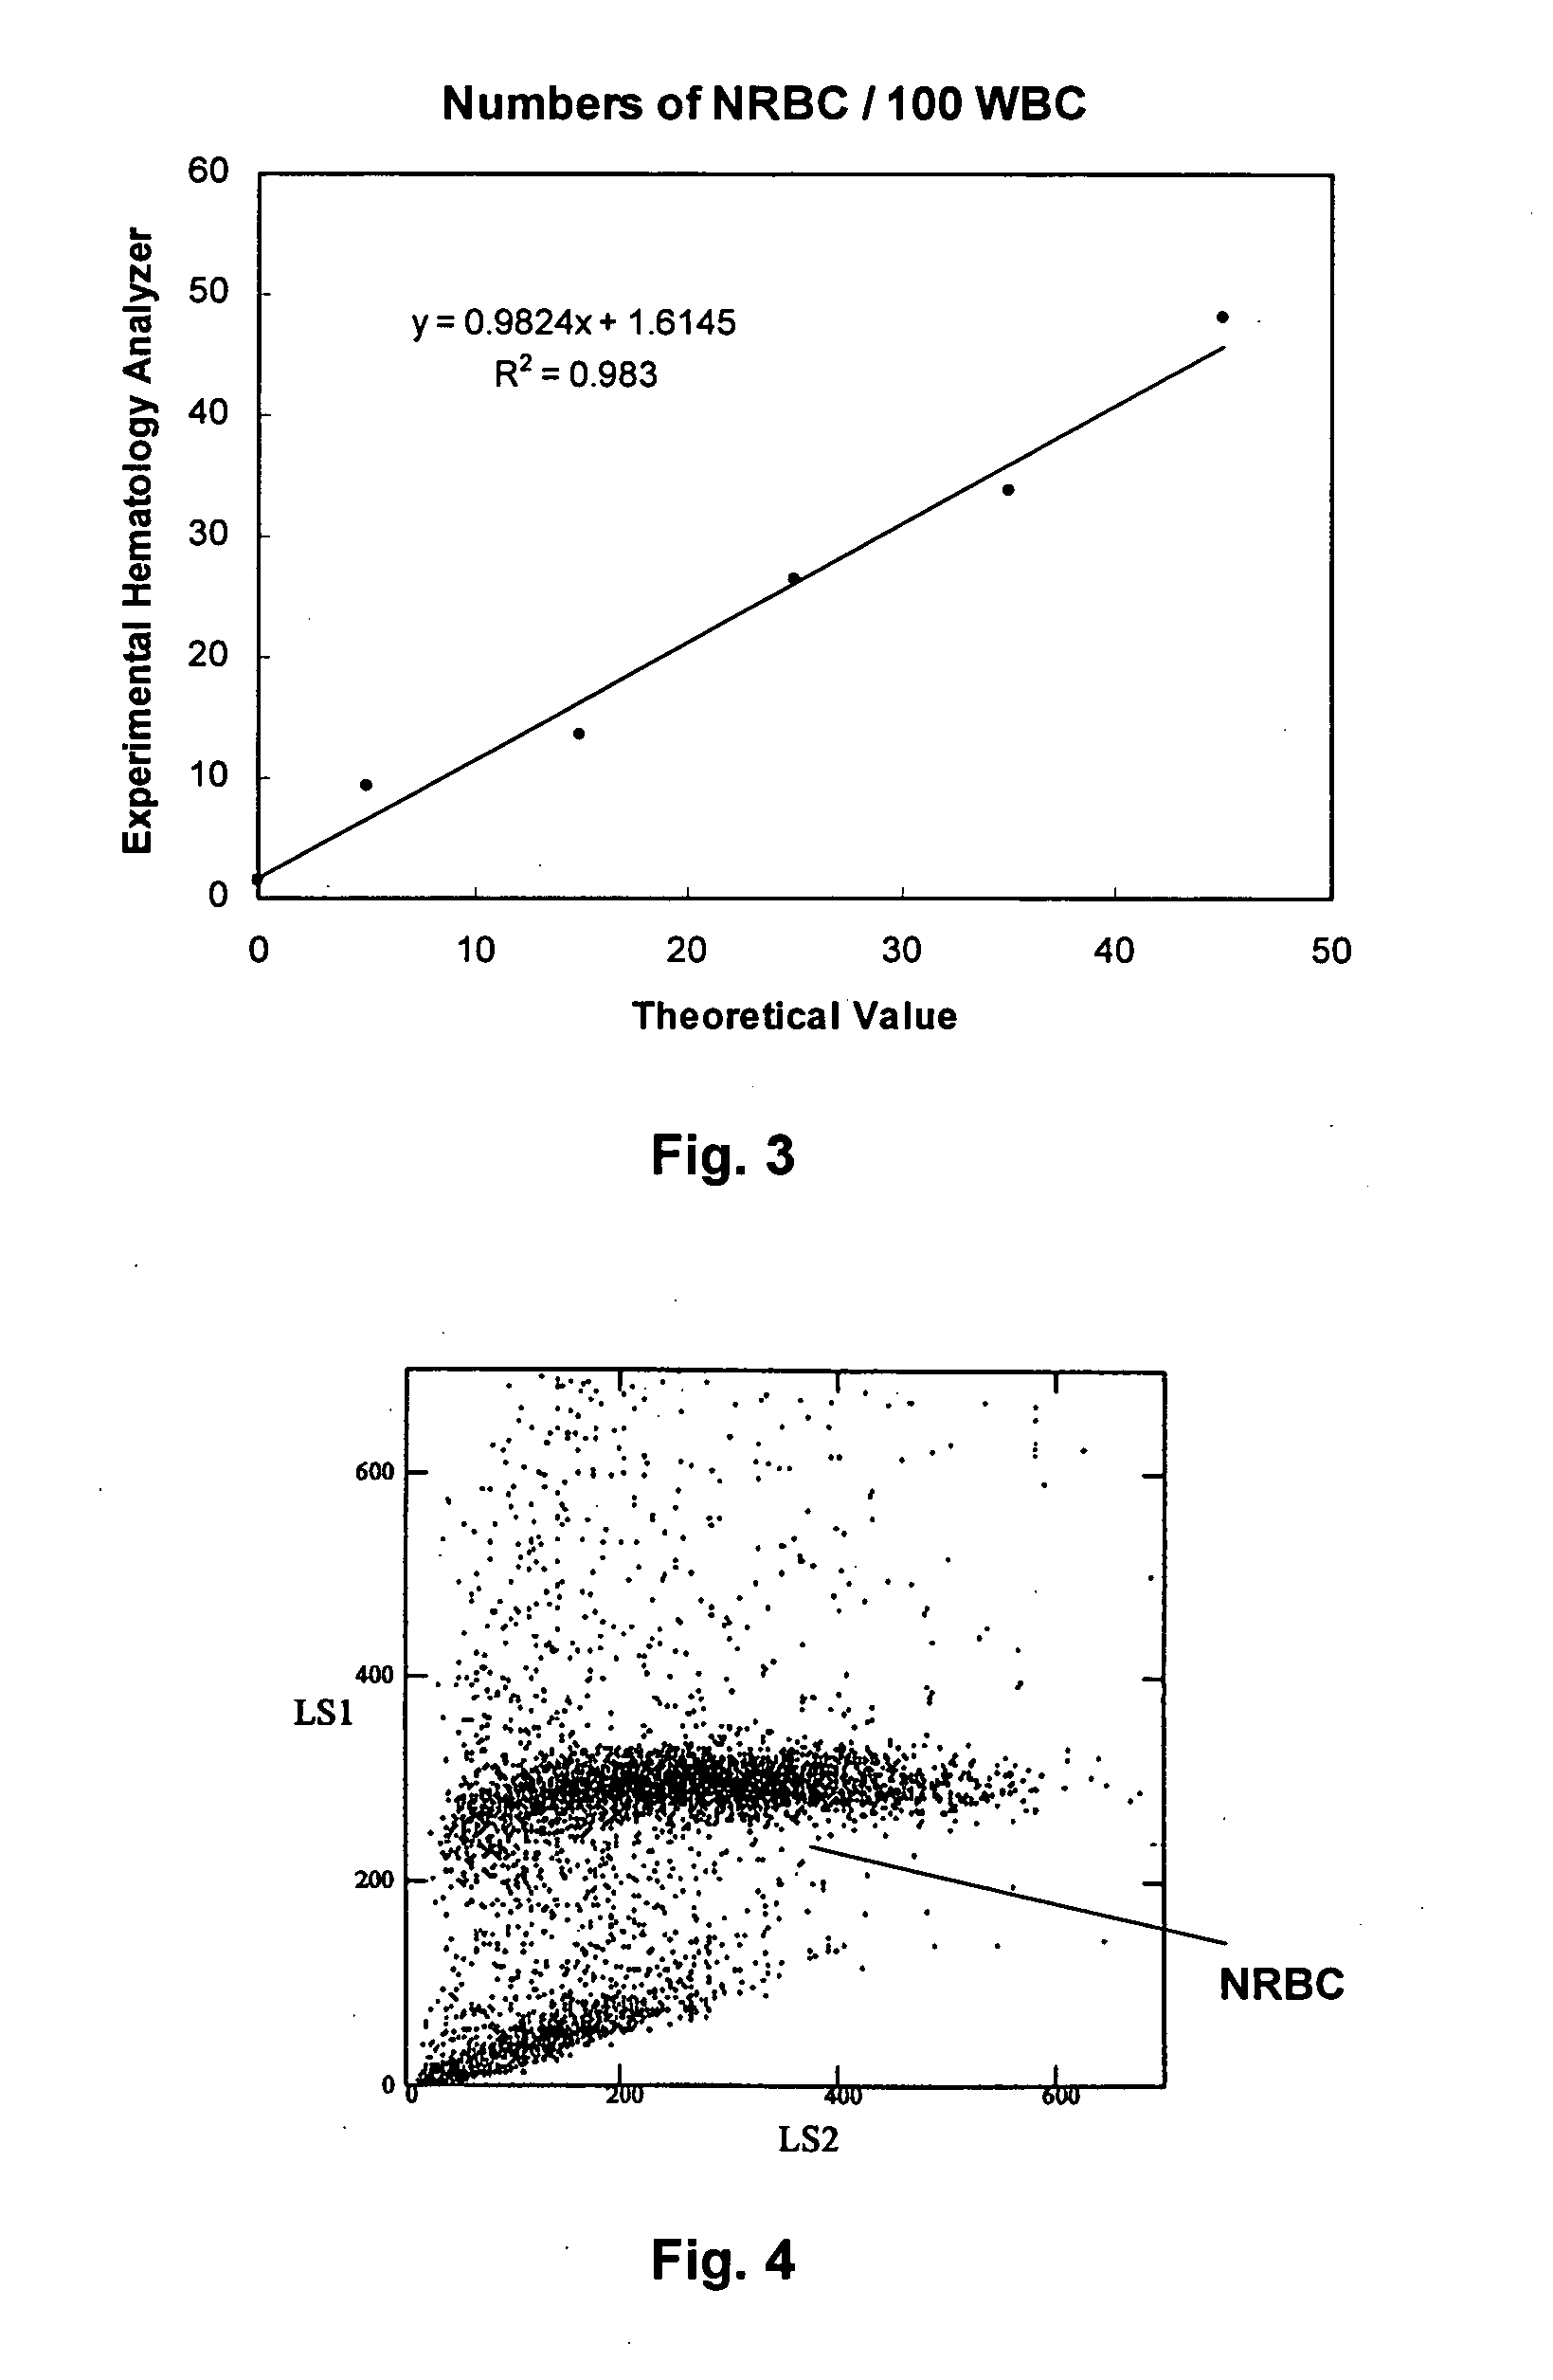 Method of using a reference control composition for measurement of nucleated red blood cells